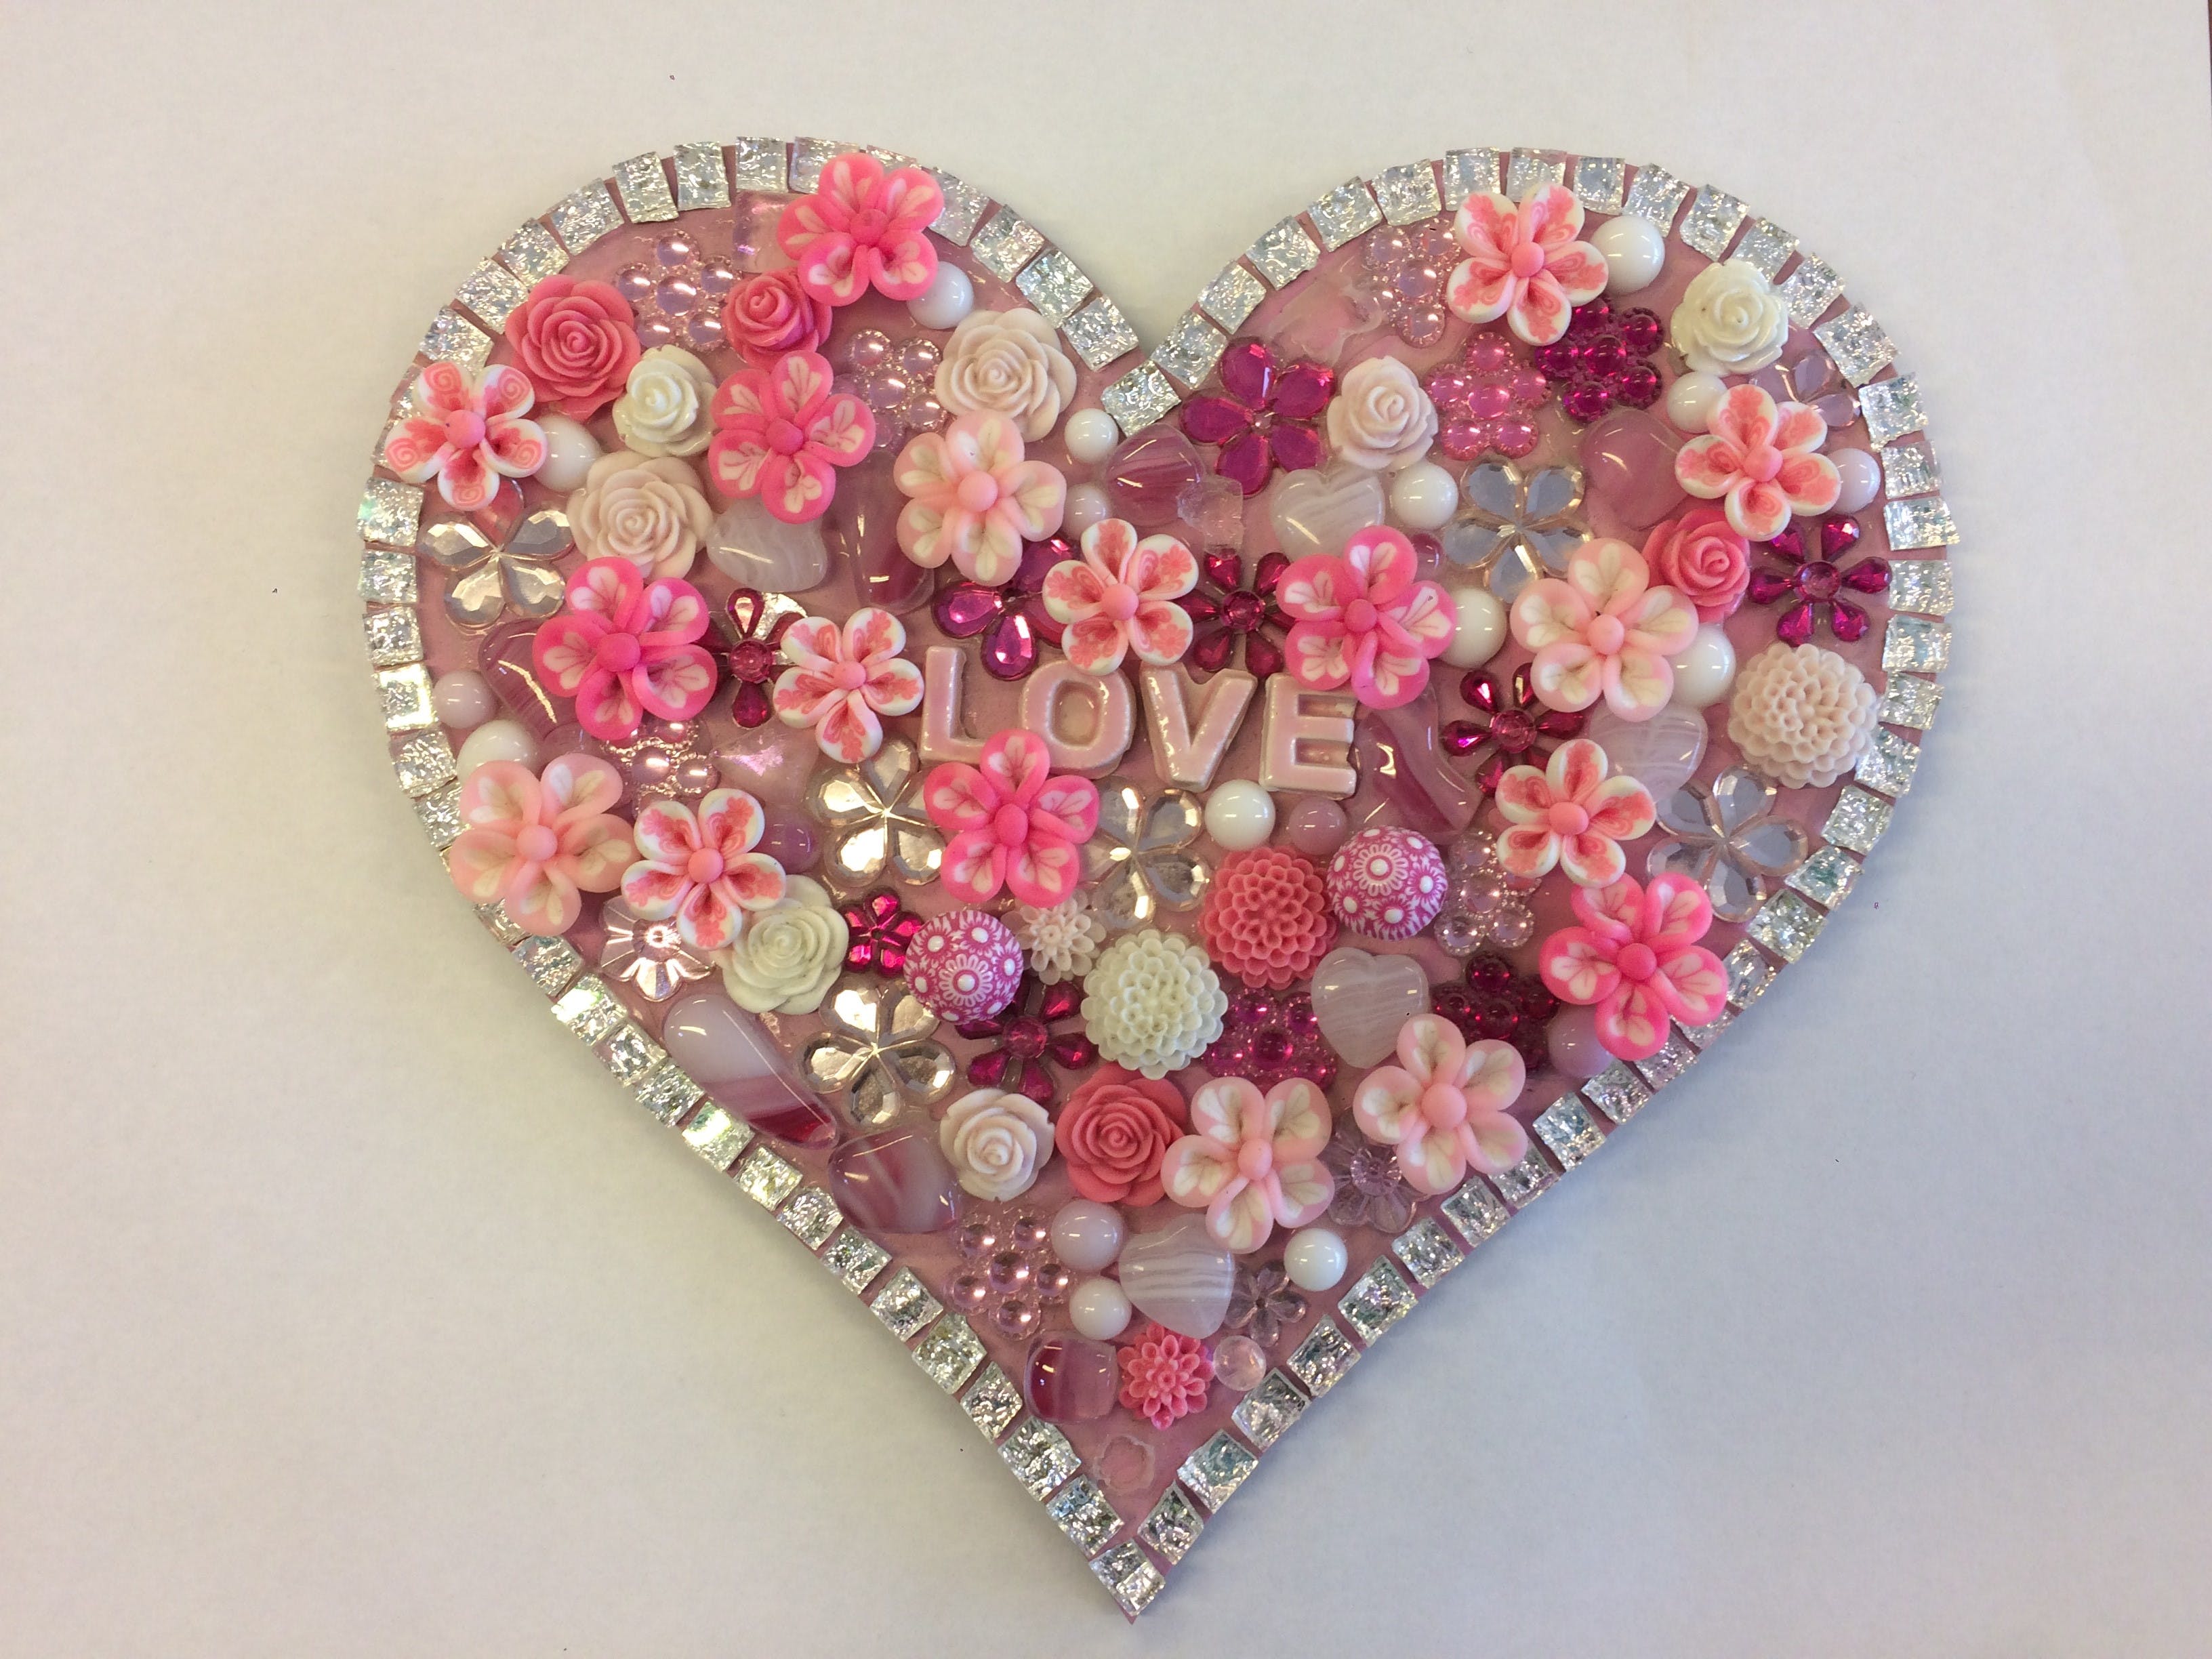 Flowers and Bling Mosaic Class for Kids - Lennox Head Accommodation